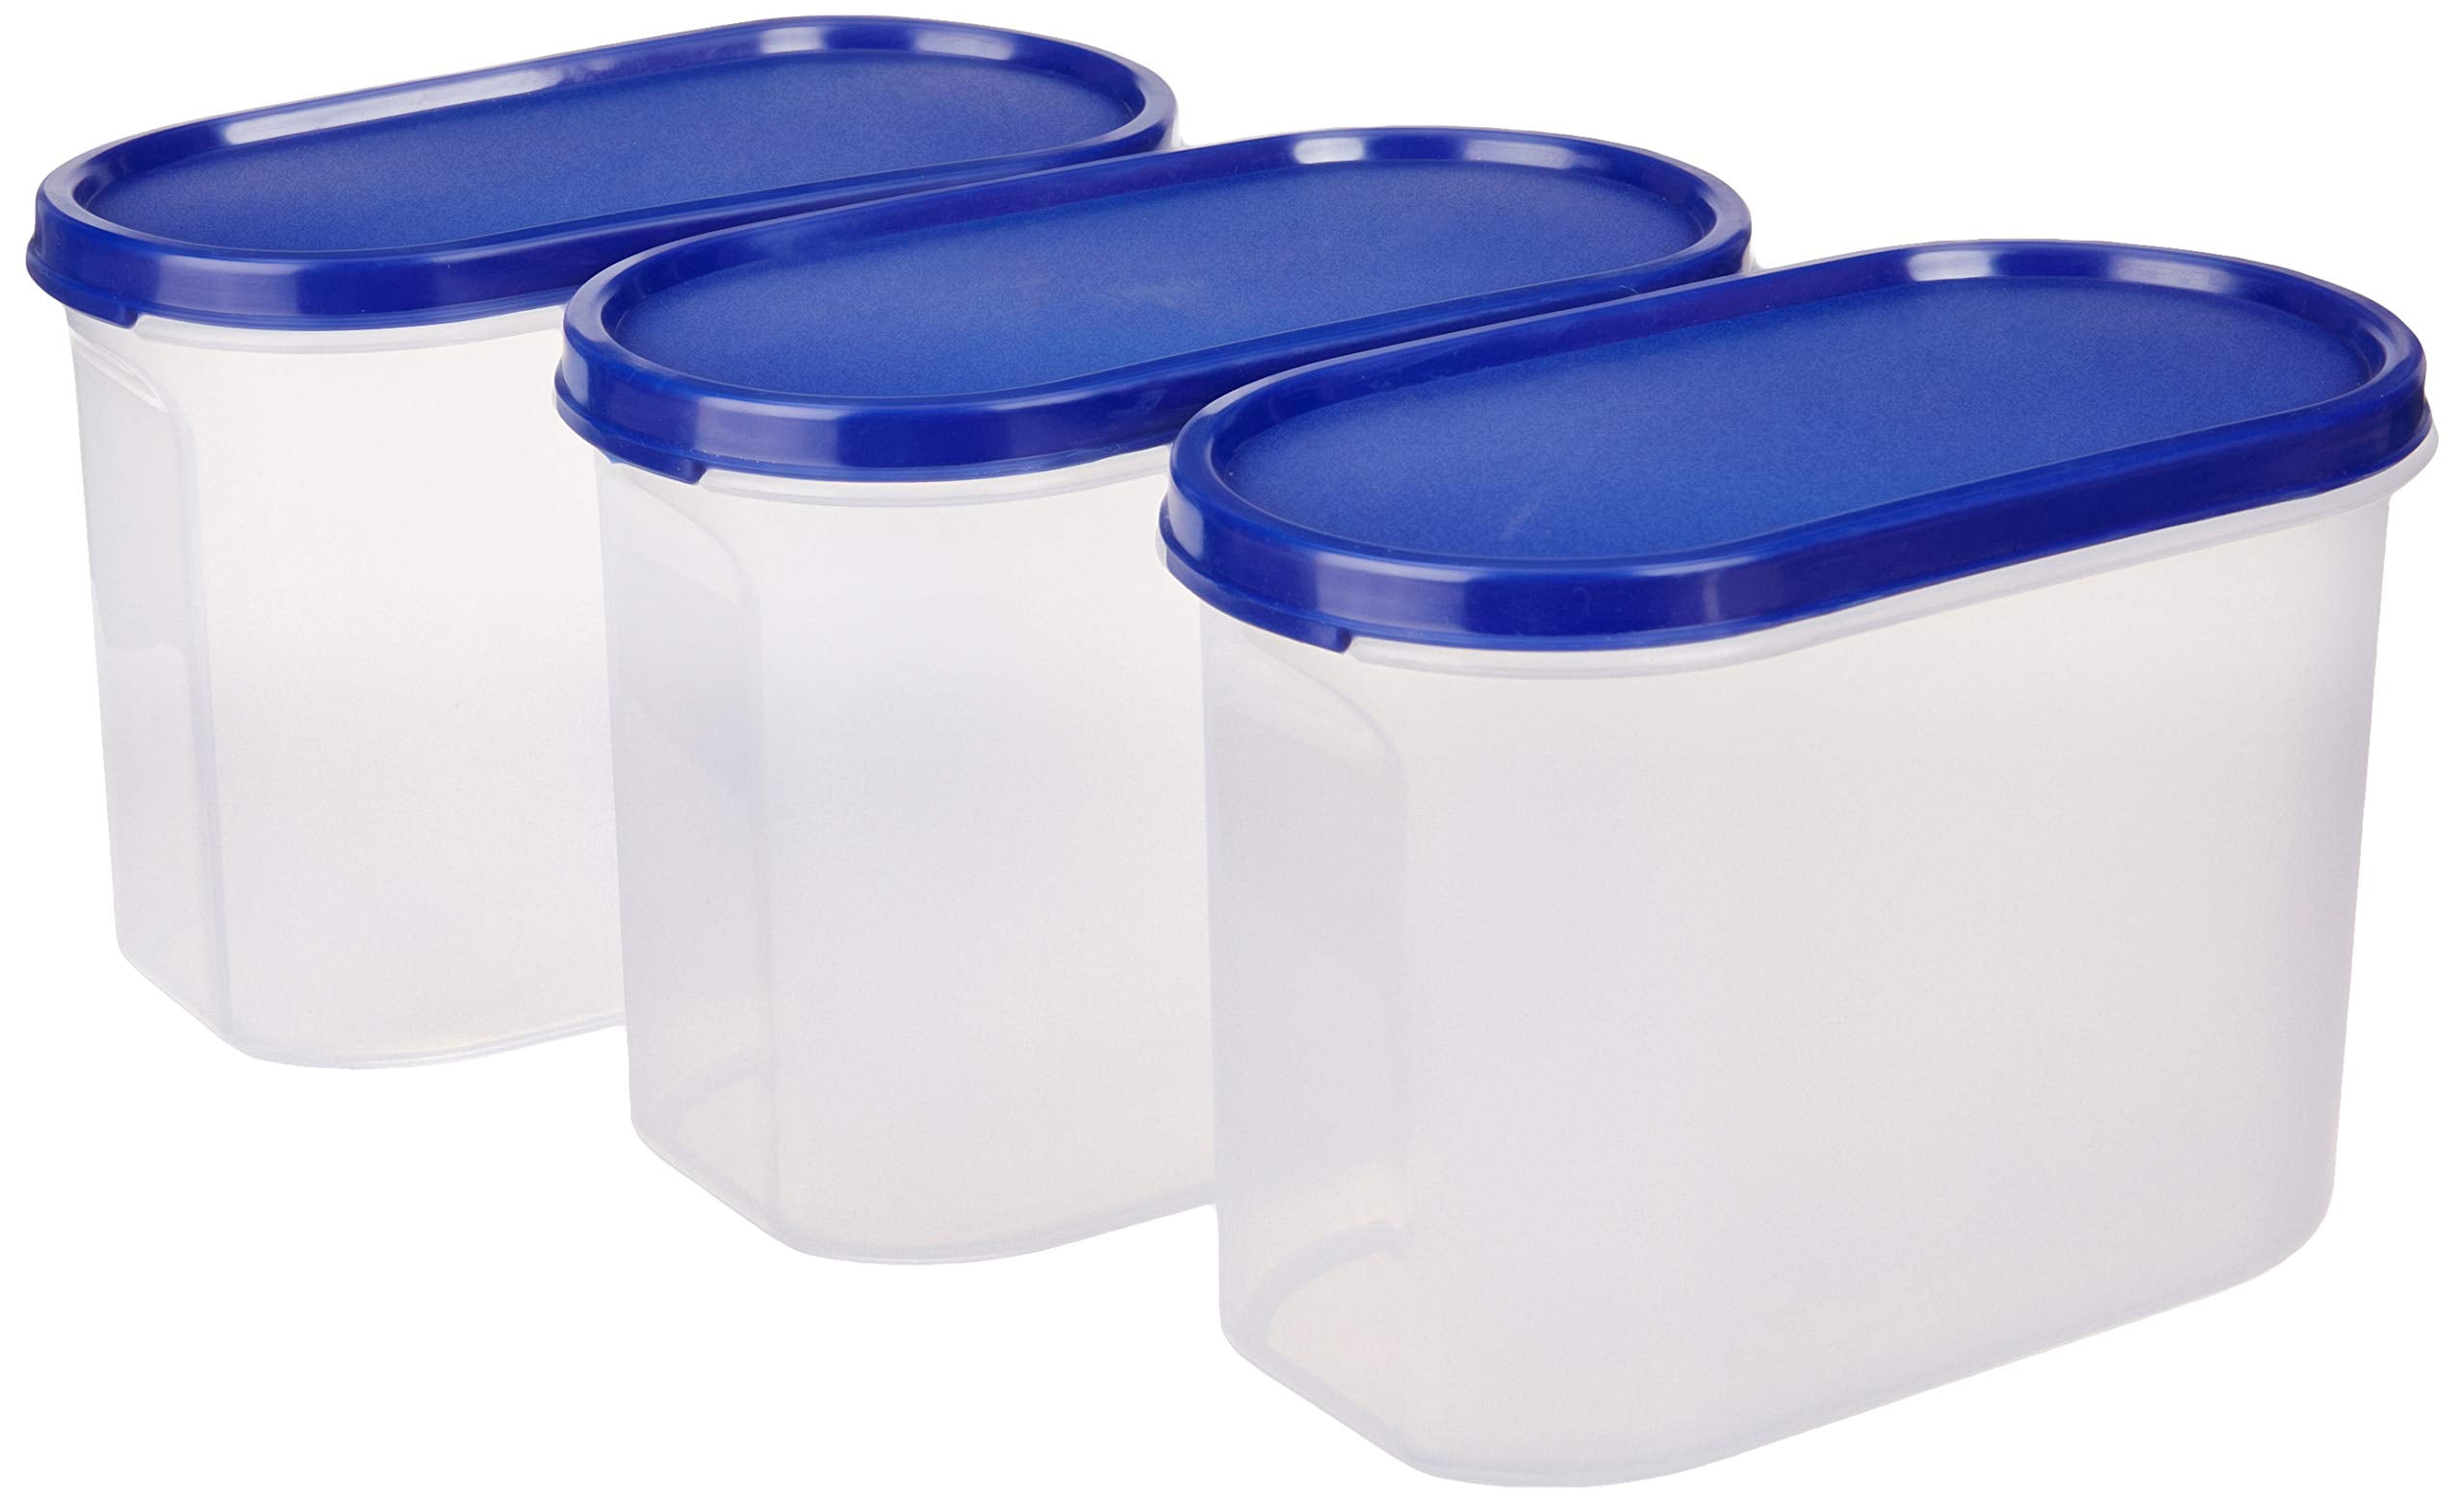 at Home Bistro 12-Piece Airtight Food Storage Container Set, Blue